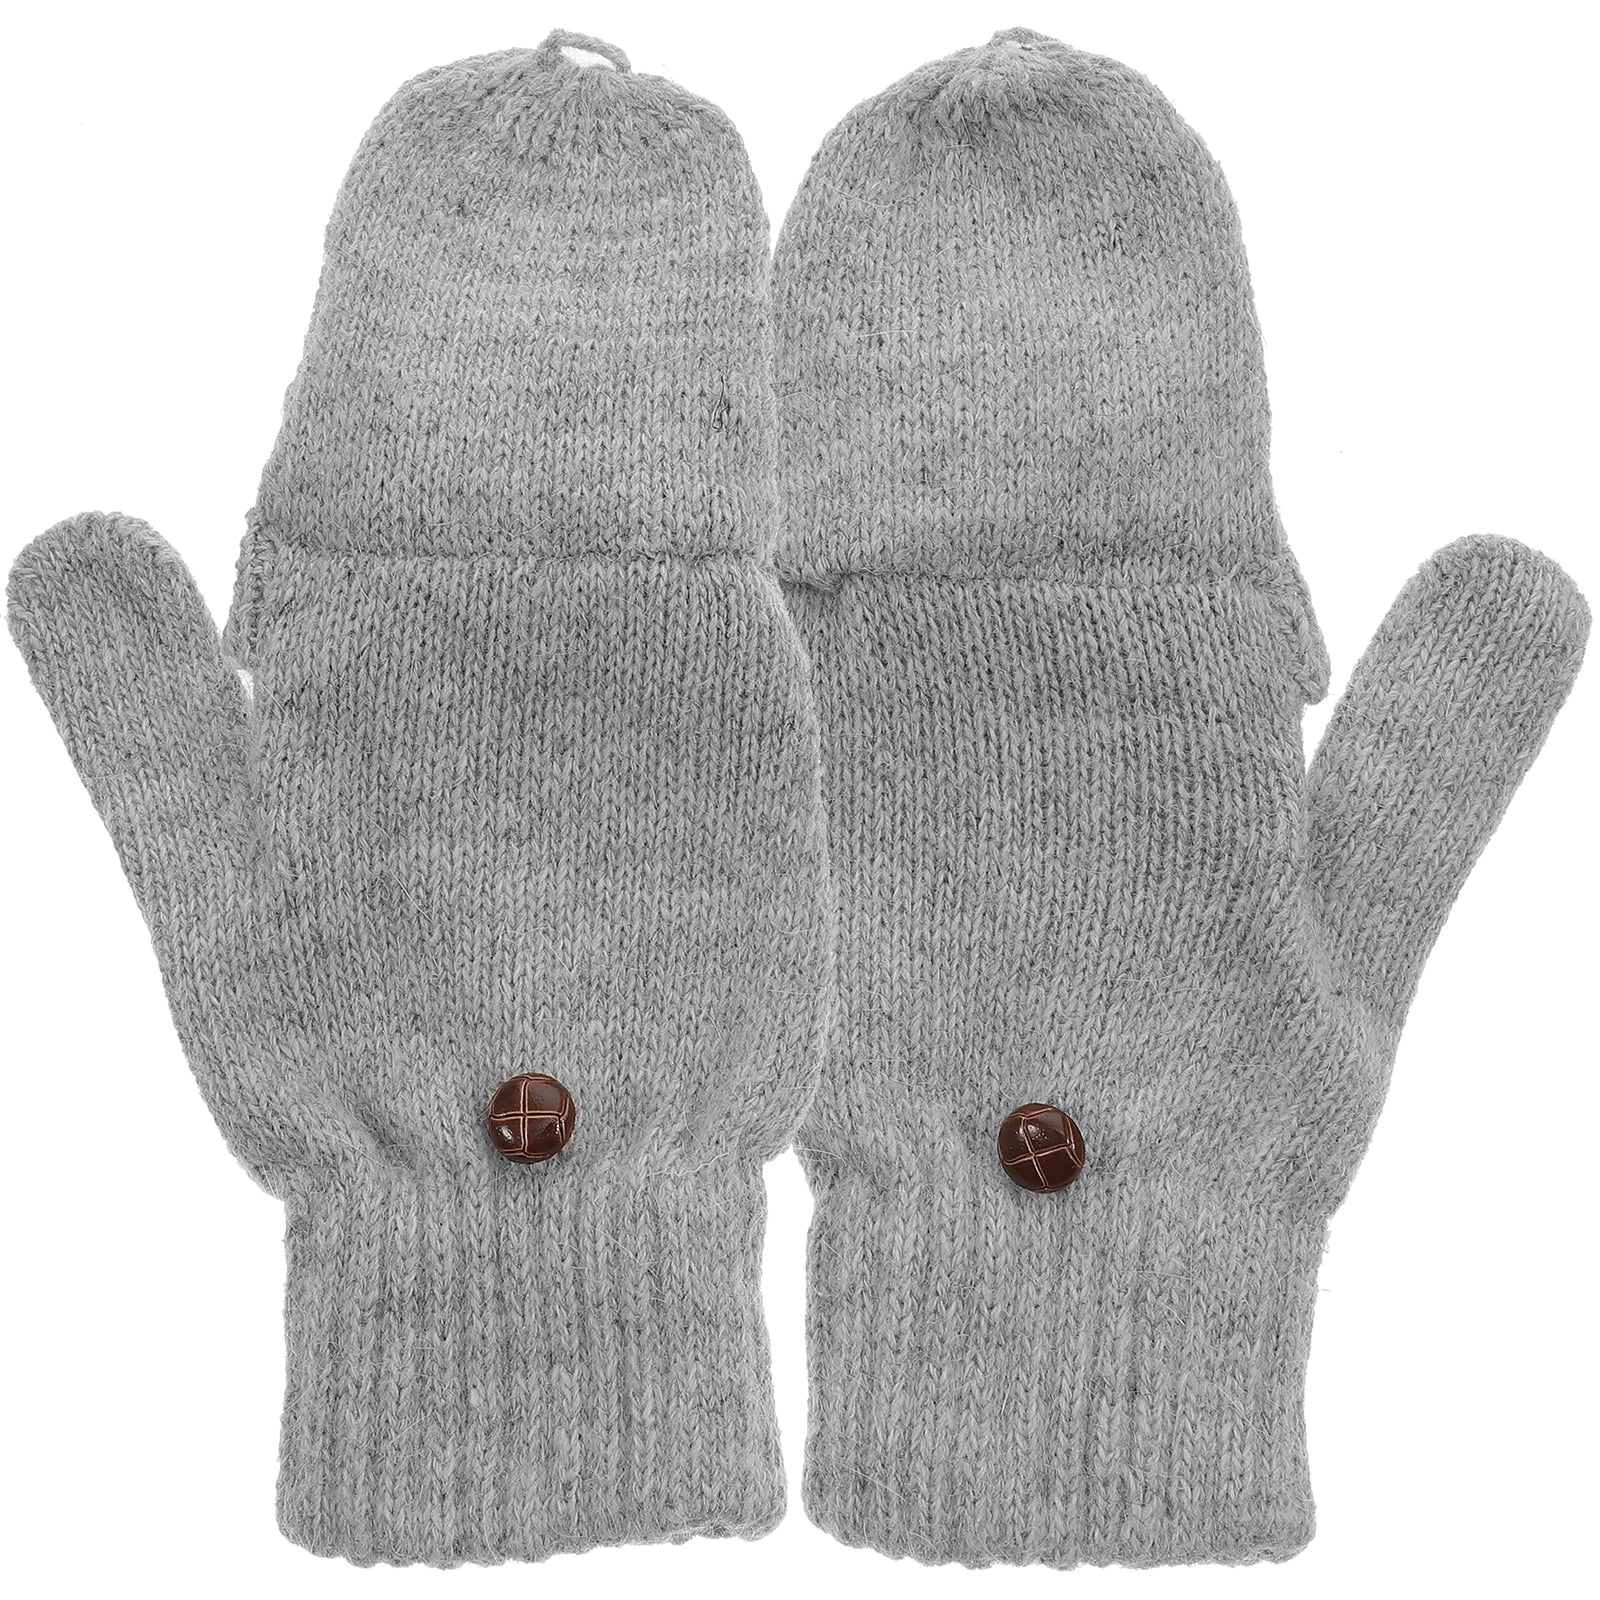 Winter Knitted Convertible Fingerless Gloves For Women Warm Solid Color  Mittens With Heating Function From Zfryck, $29.07